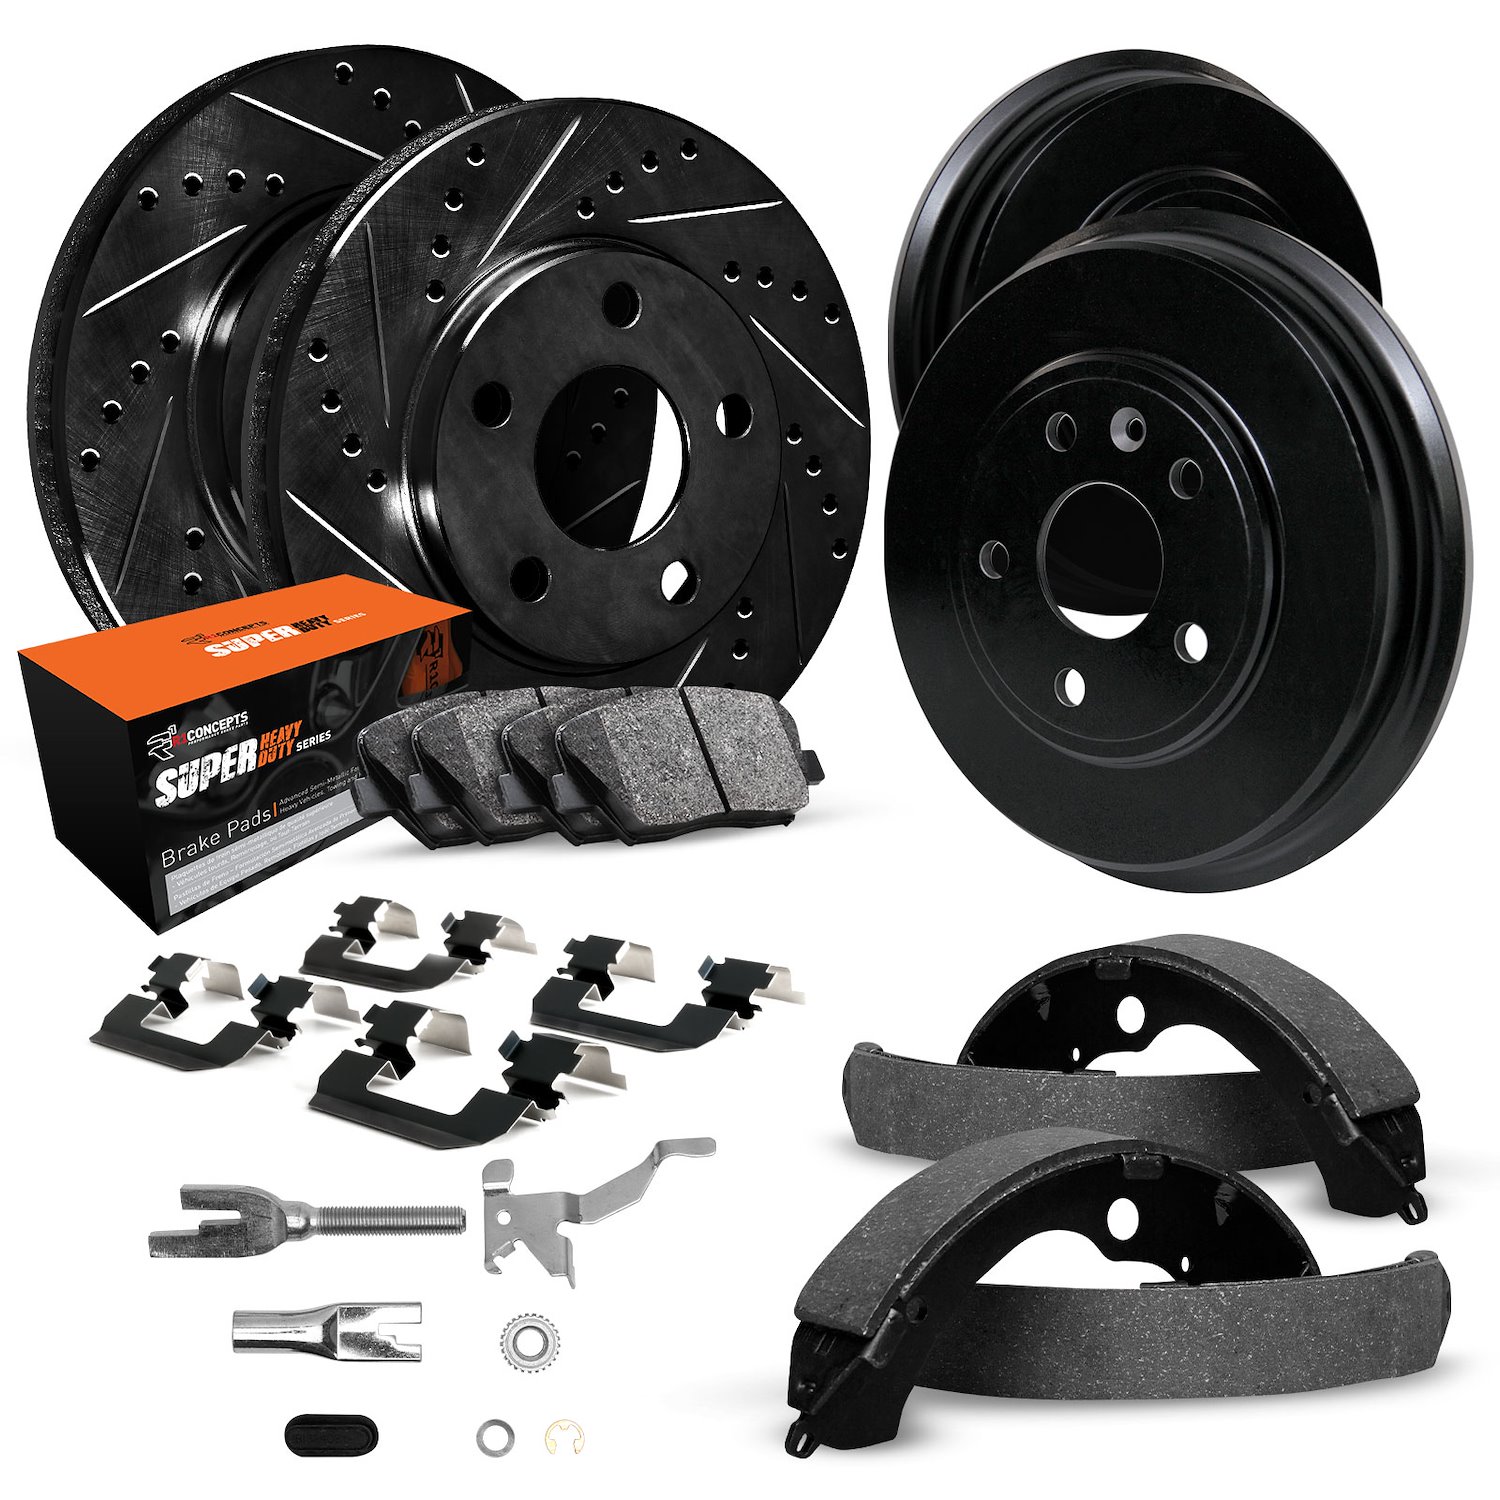 E-Line Drilled/Slotted Black Rotor & Drum Set w/Super-Duty Pads, Shoes, Hardware/Adjusters, 2004-2008 GM